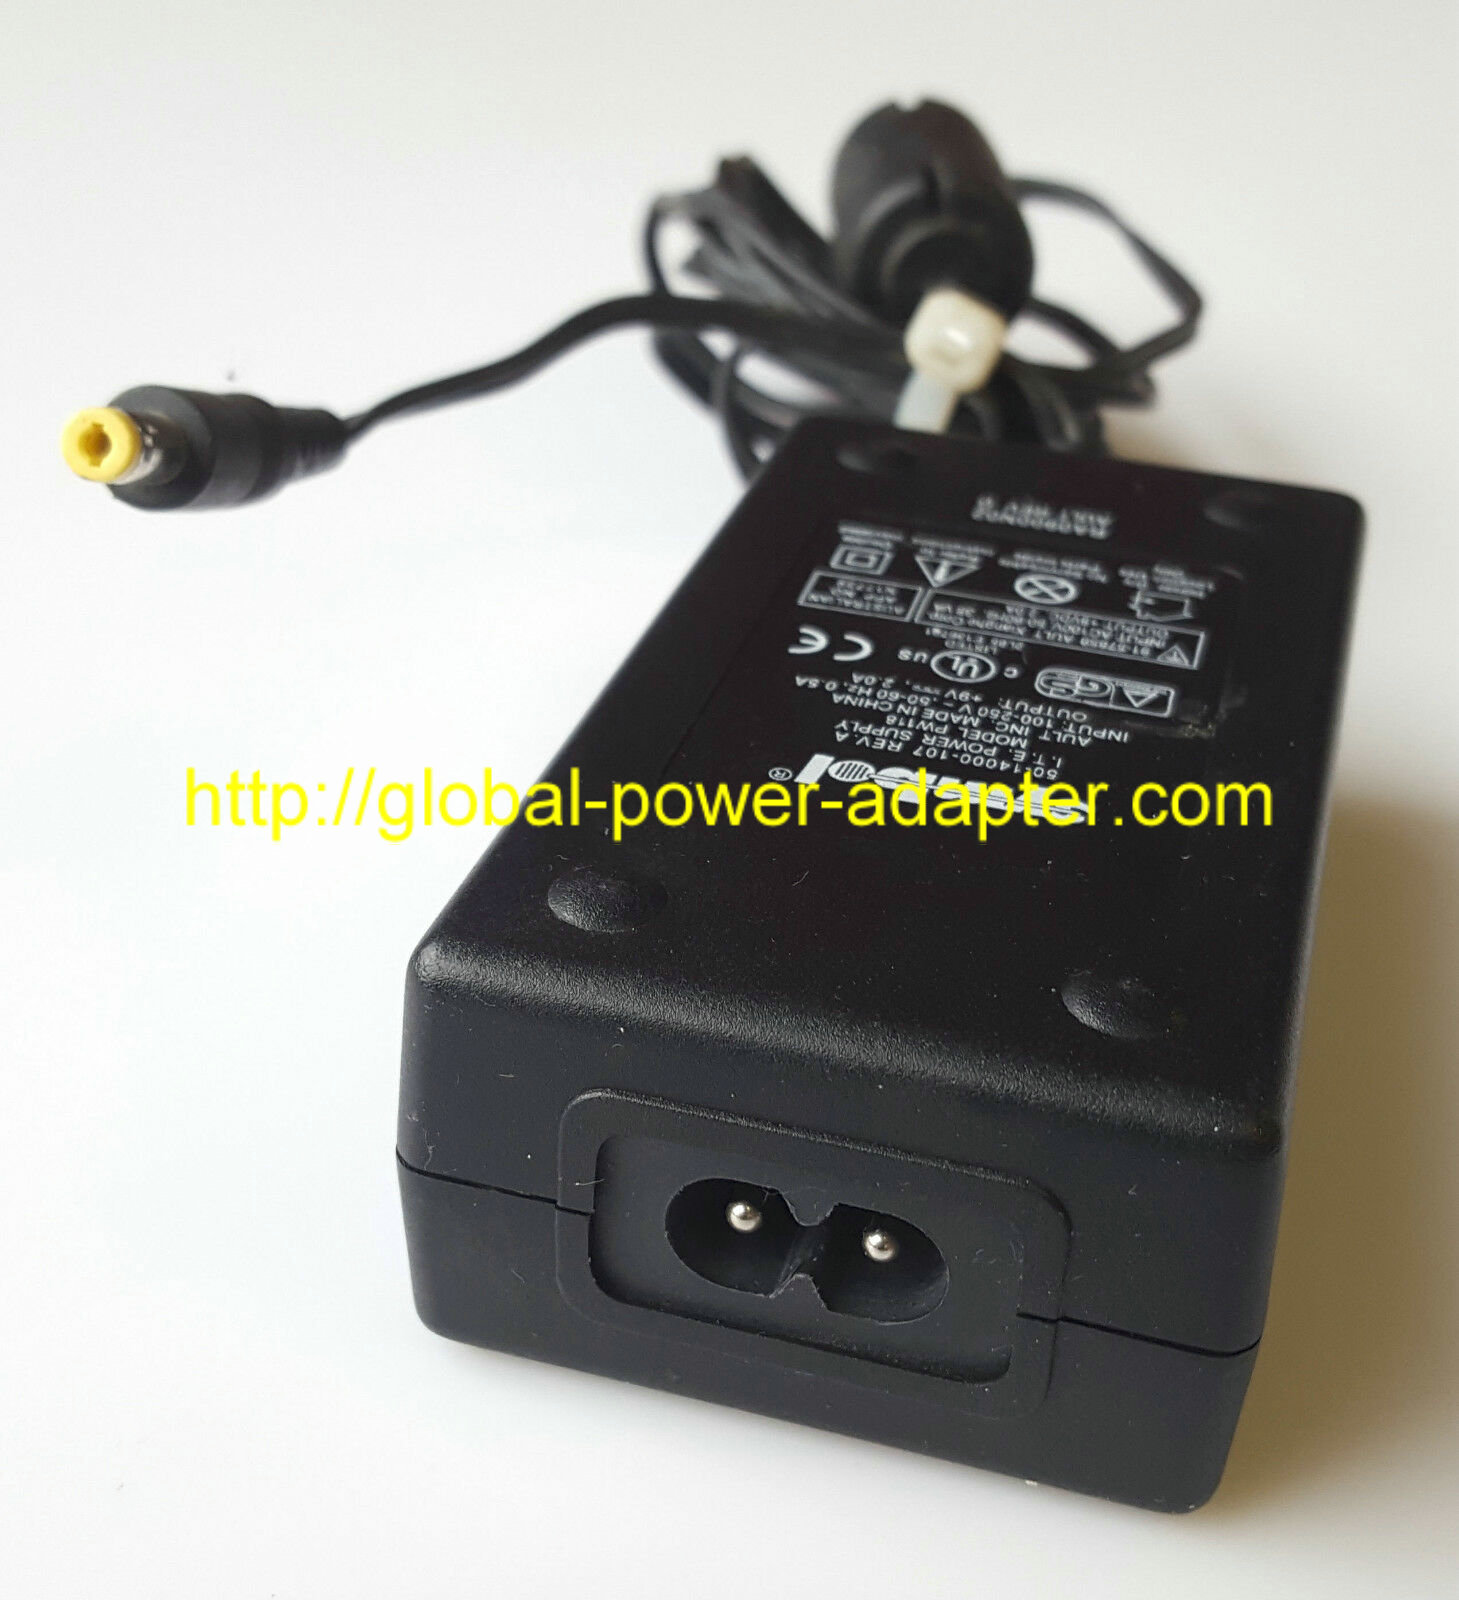 *Brand NEW*9V 2.0A AC/DC ADAPTER SYMBOL 50-14000-107 PW118 POWER SUPPLY